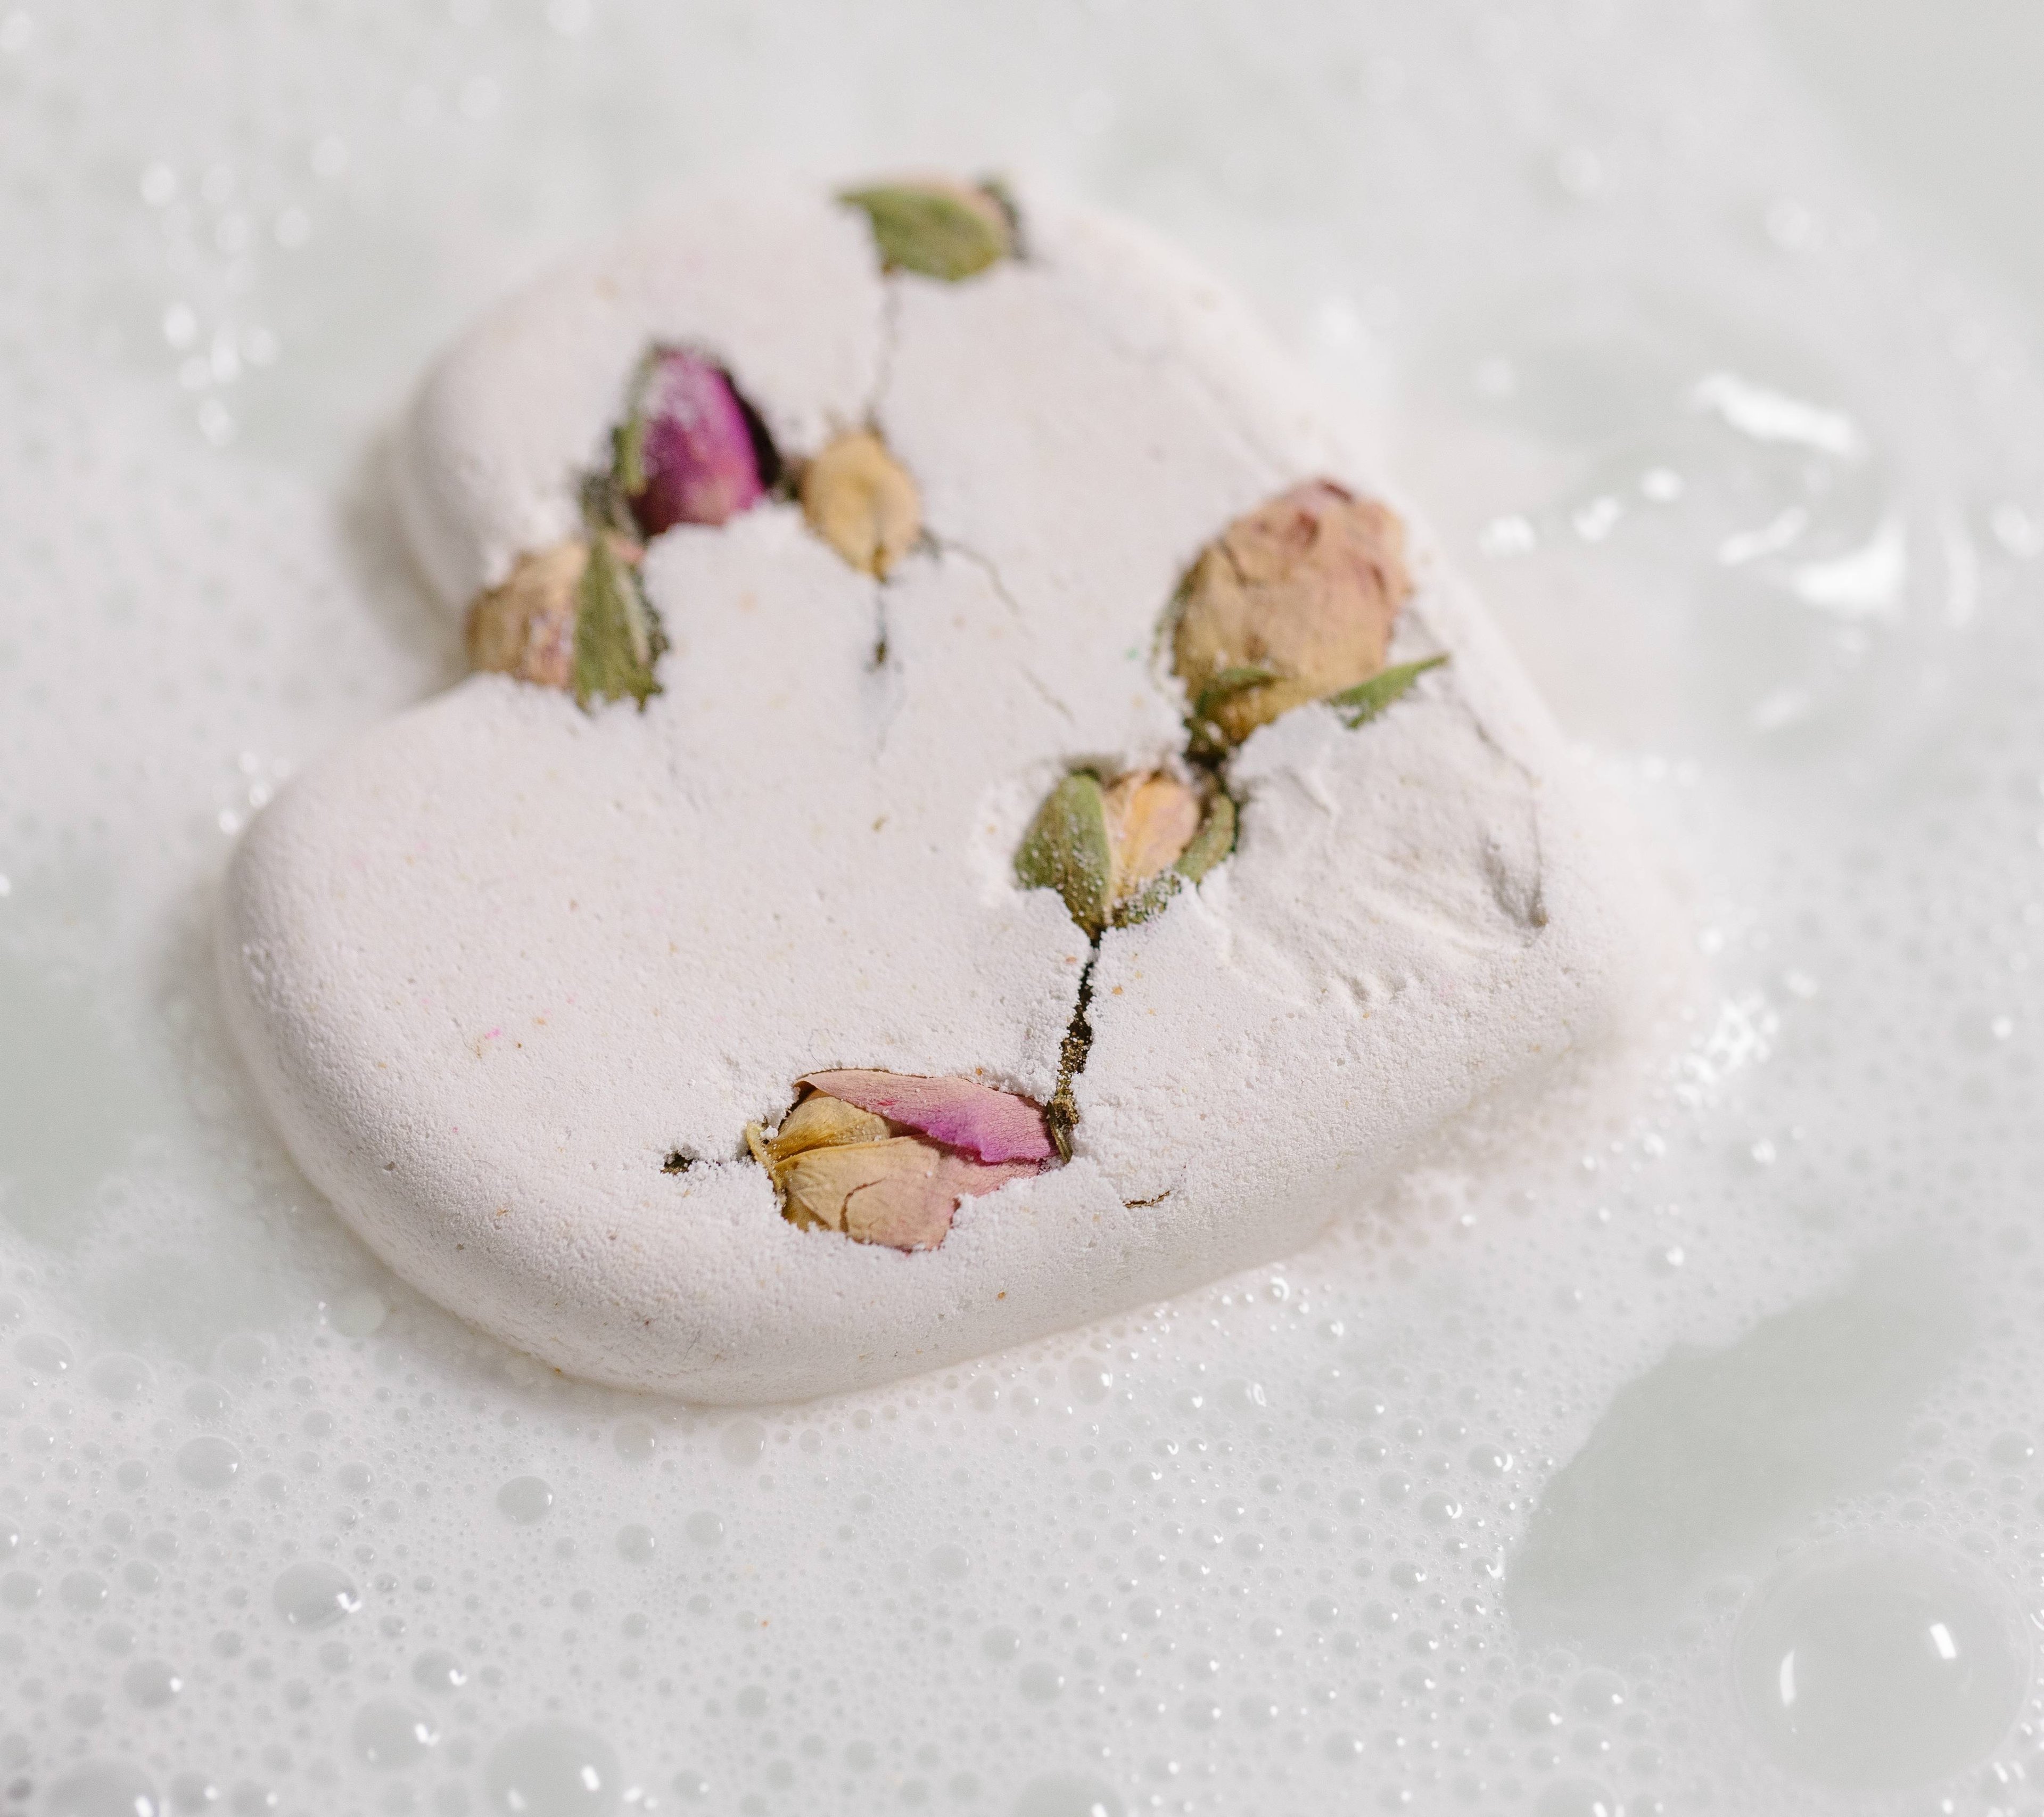 The image shows the Tisty Tosty bath bomb sitting on the water dispersing gentle white bubbles and dried rose buds throughout. 